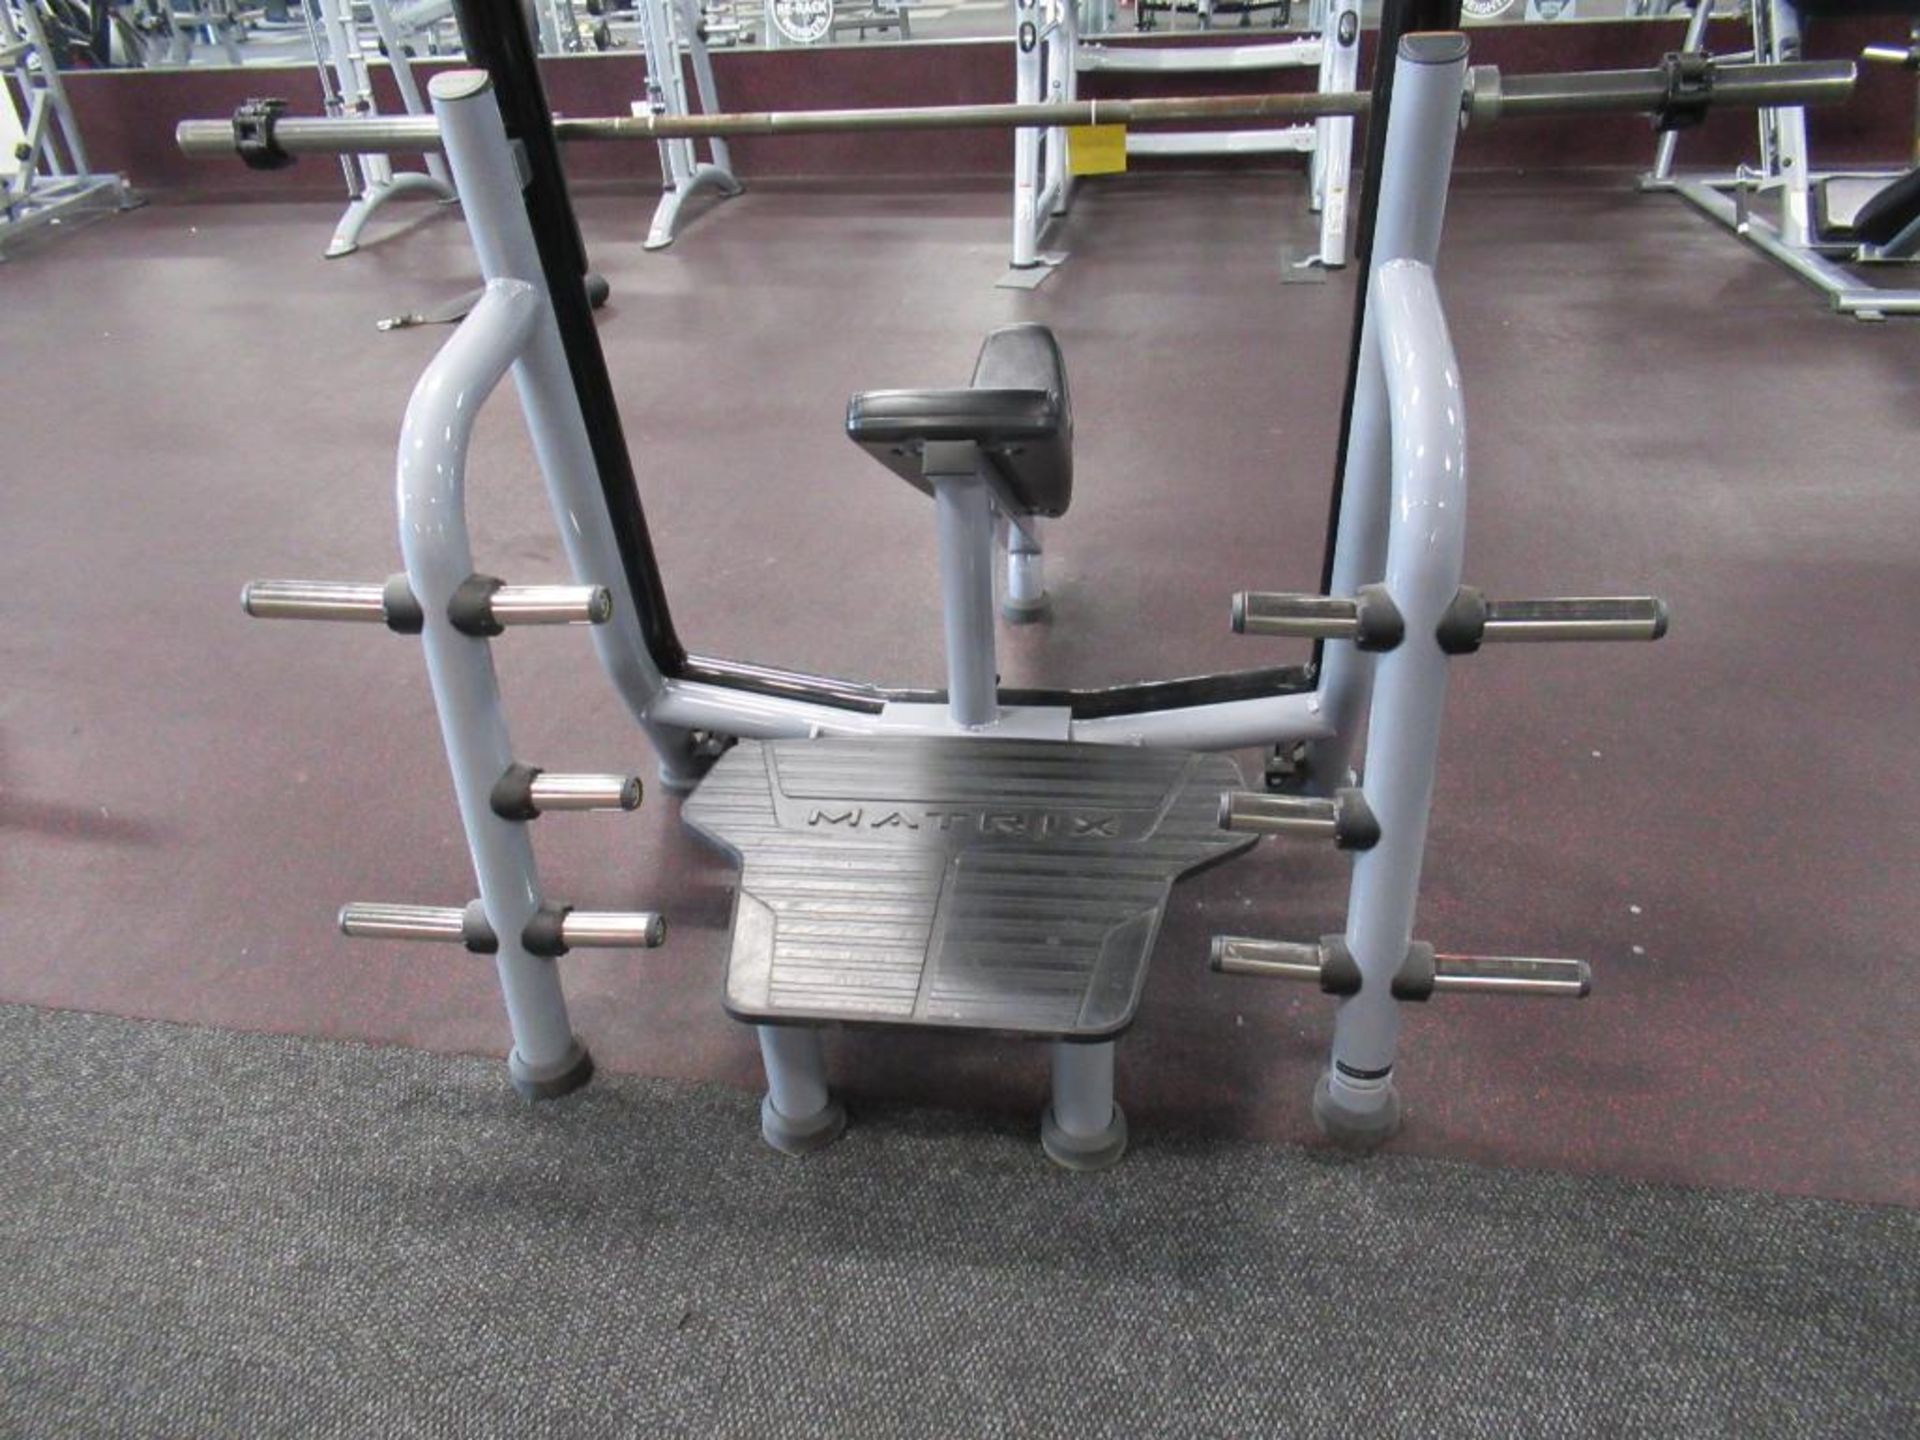 Matrix Model MG-A679B-04 Plated Loaded Bench Press, Spotting Deck, Plate Storage, Max Weight 400 lbs - Image 4 of 5